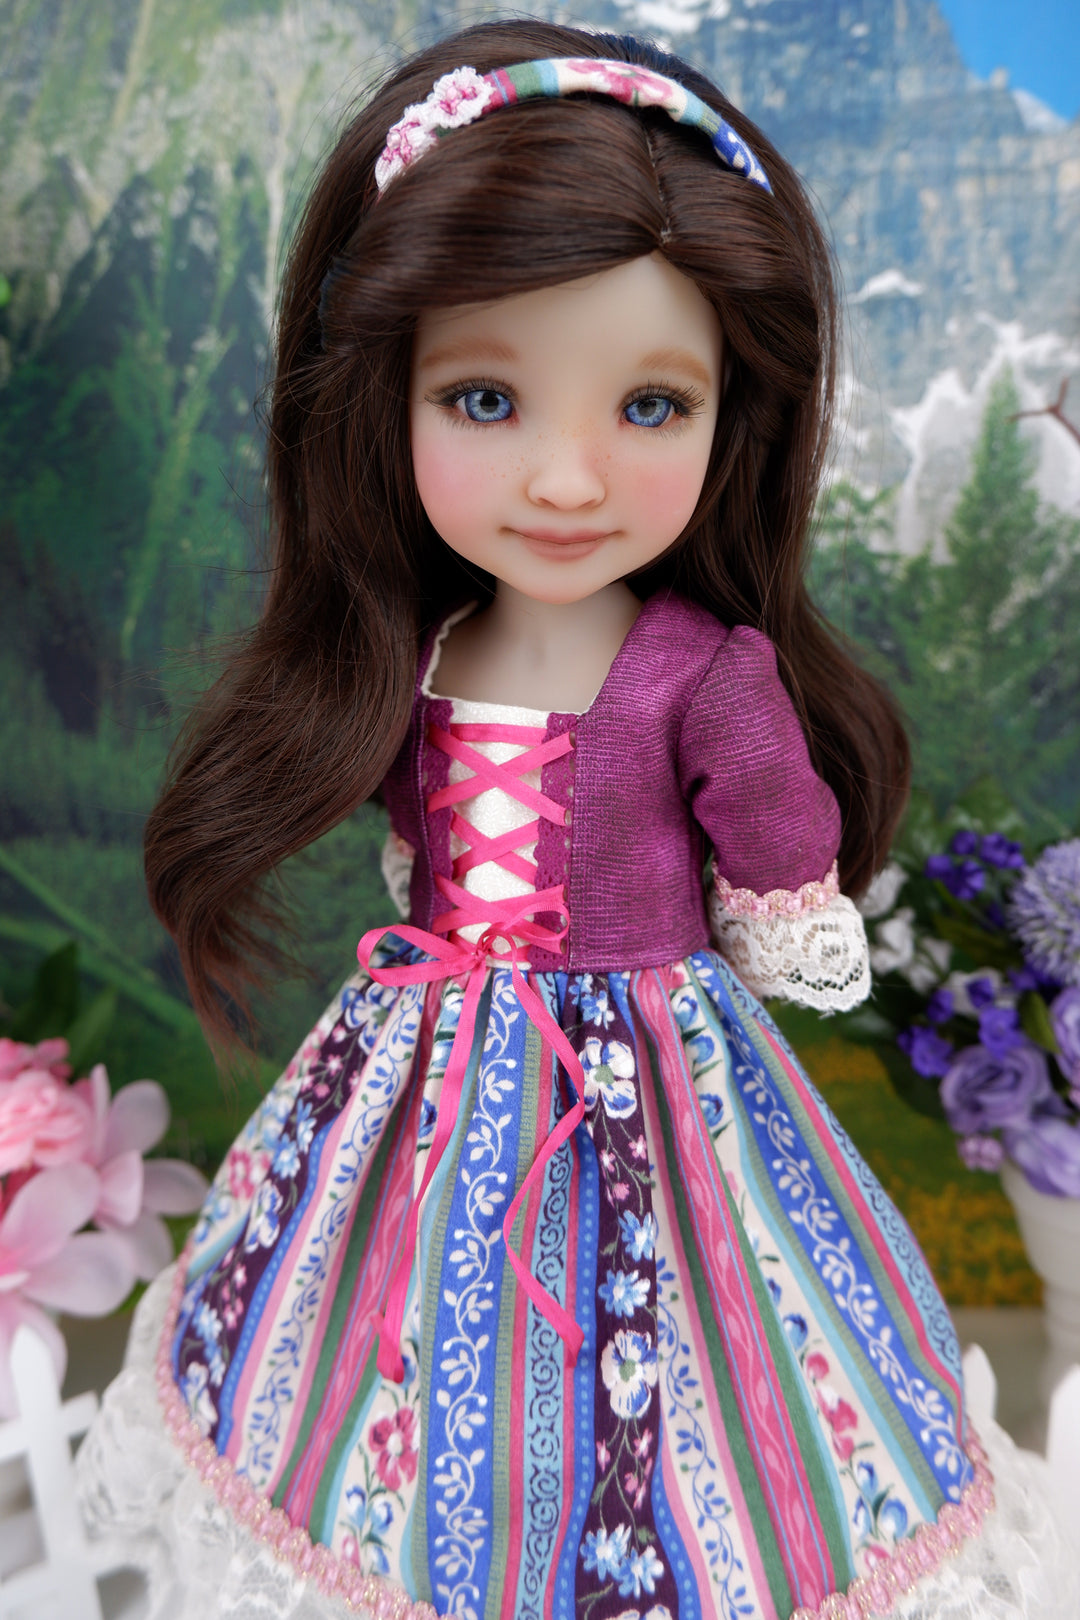 Alpine Miss - dirndl dress ensemble with boots for Ruby Red Fashion Friends doll